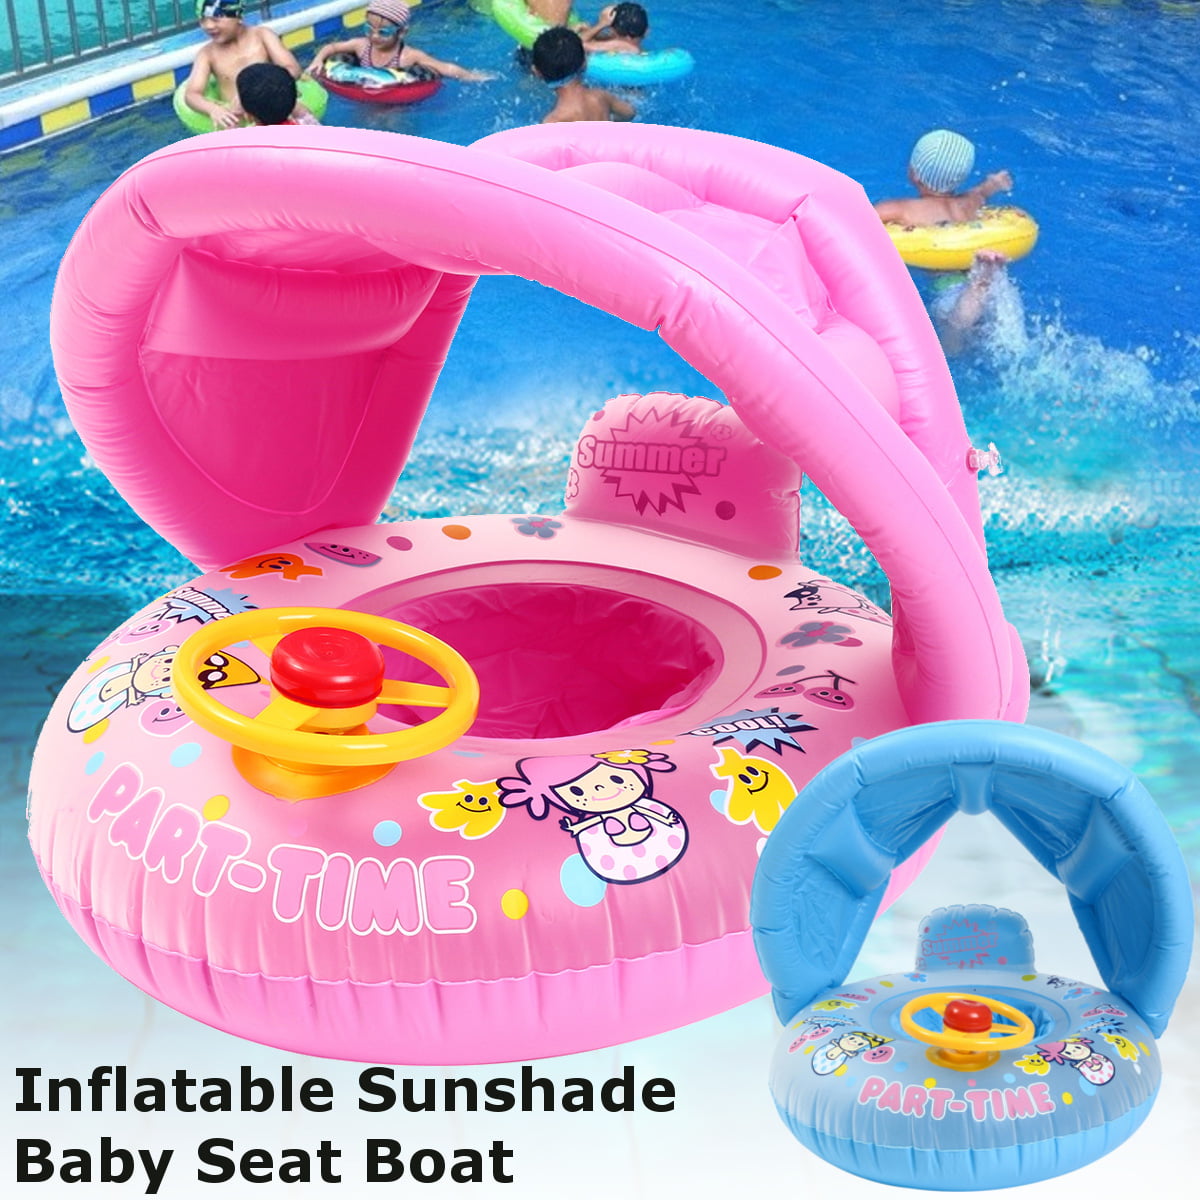 Inflatable Sunshade Baby Aid Kid Float Seat Boat Swimming Pool Ring Wheel Canopy 